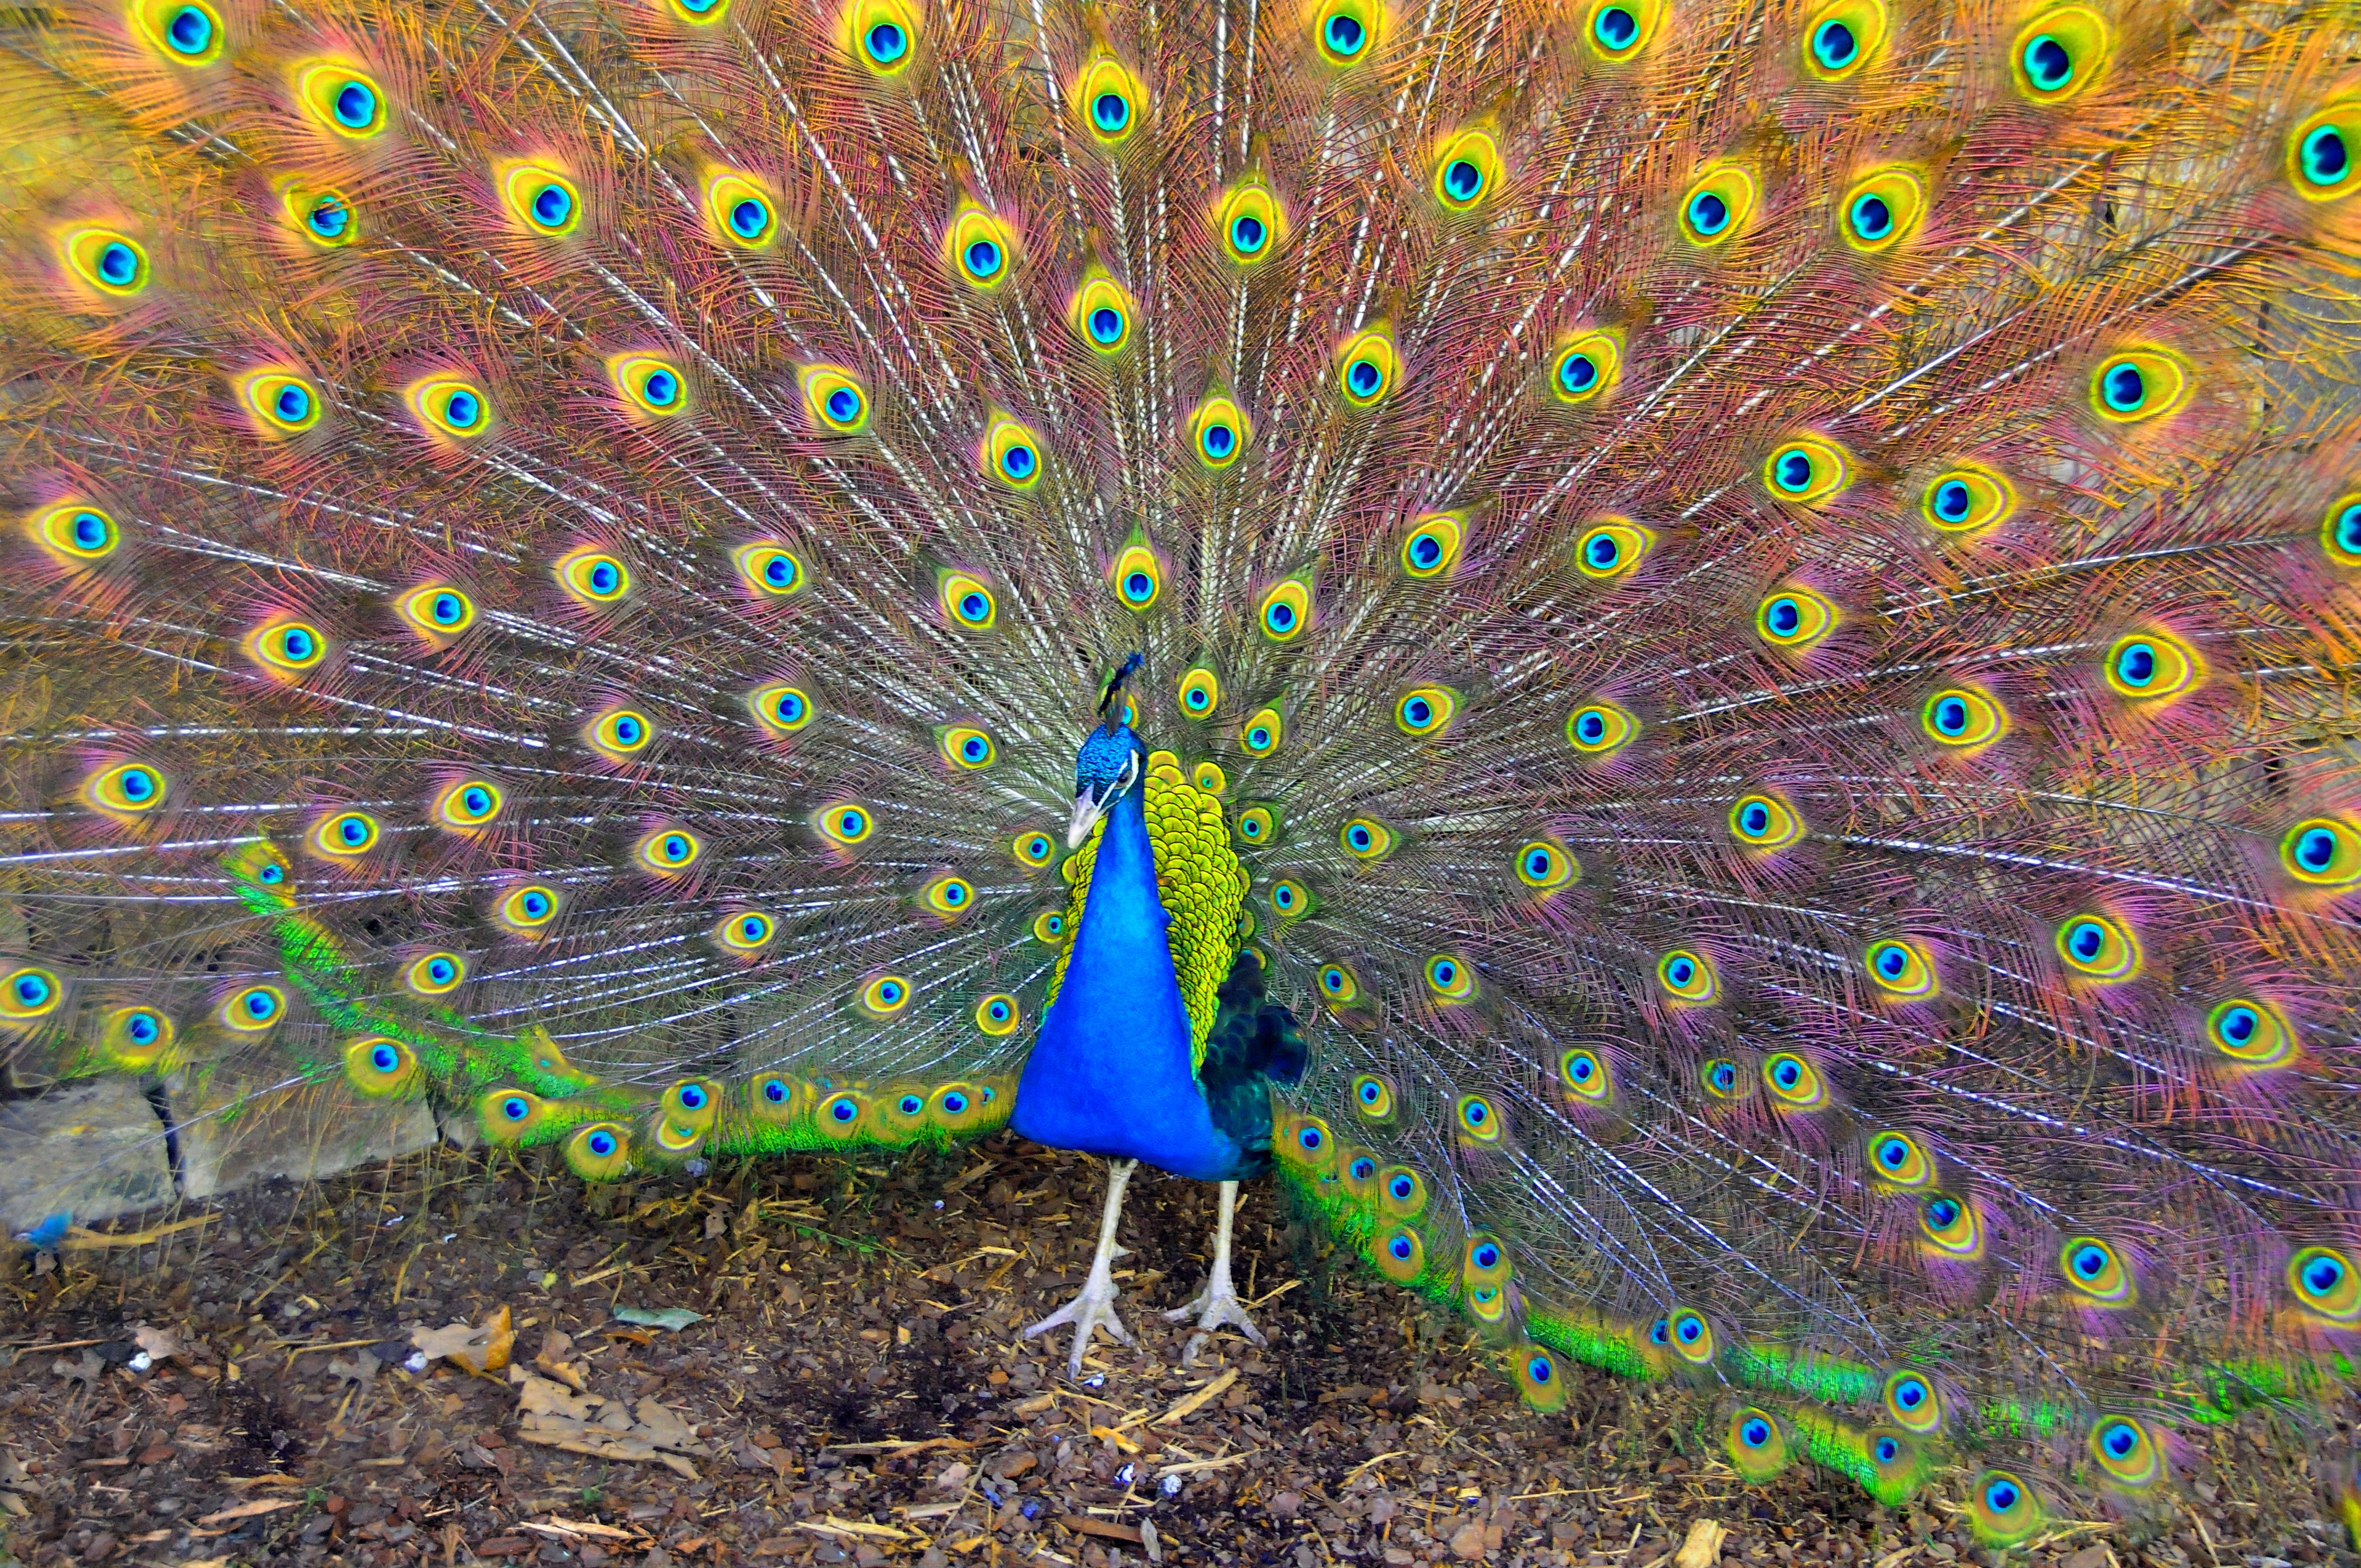 mobile desktop background free beautiful hd colorful peacock wallpapers